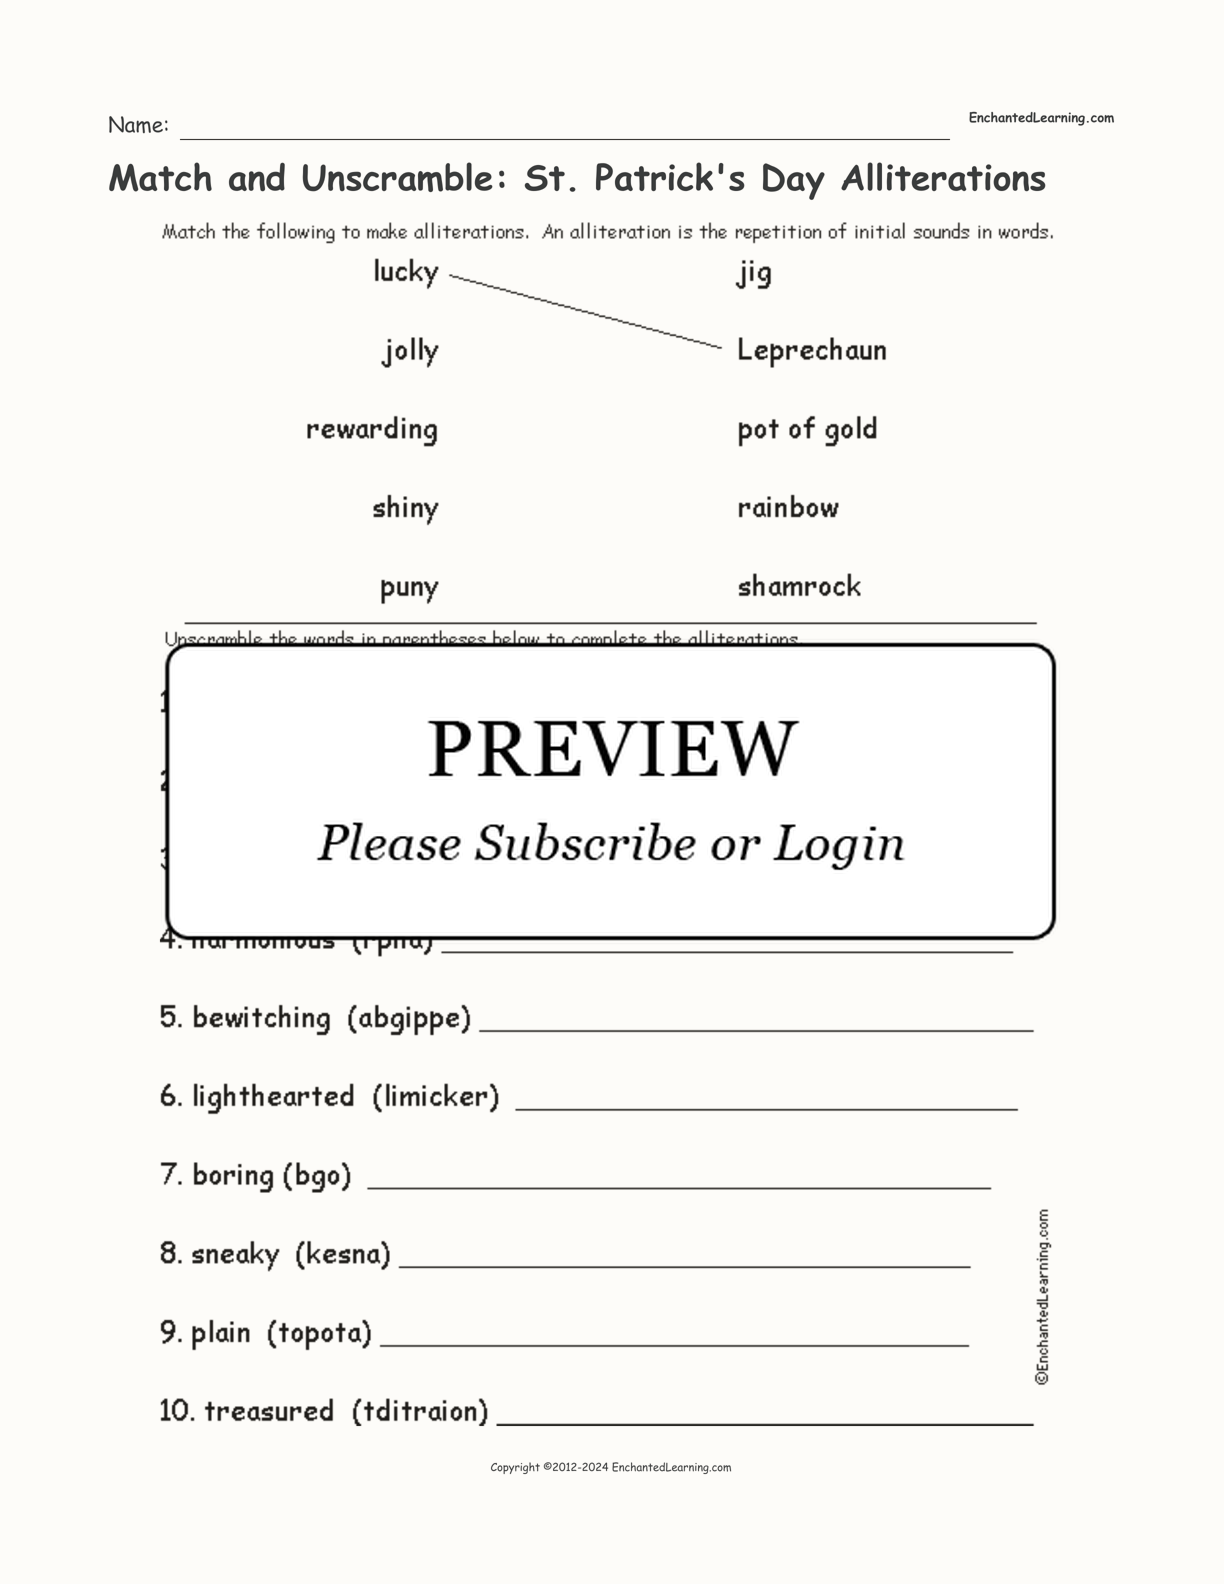 Match and Unscramble: St. Patrick's Day Alliterations interactive worksheet page 1